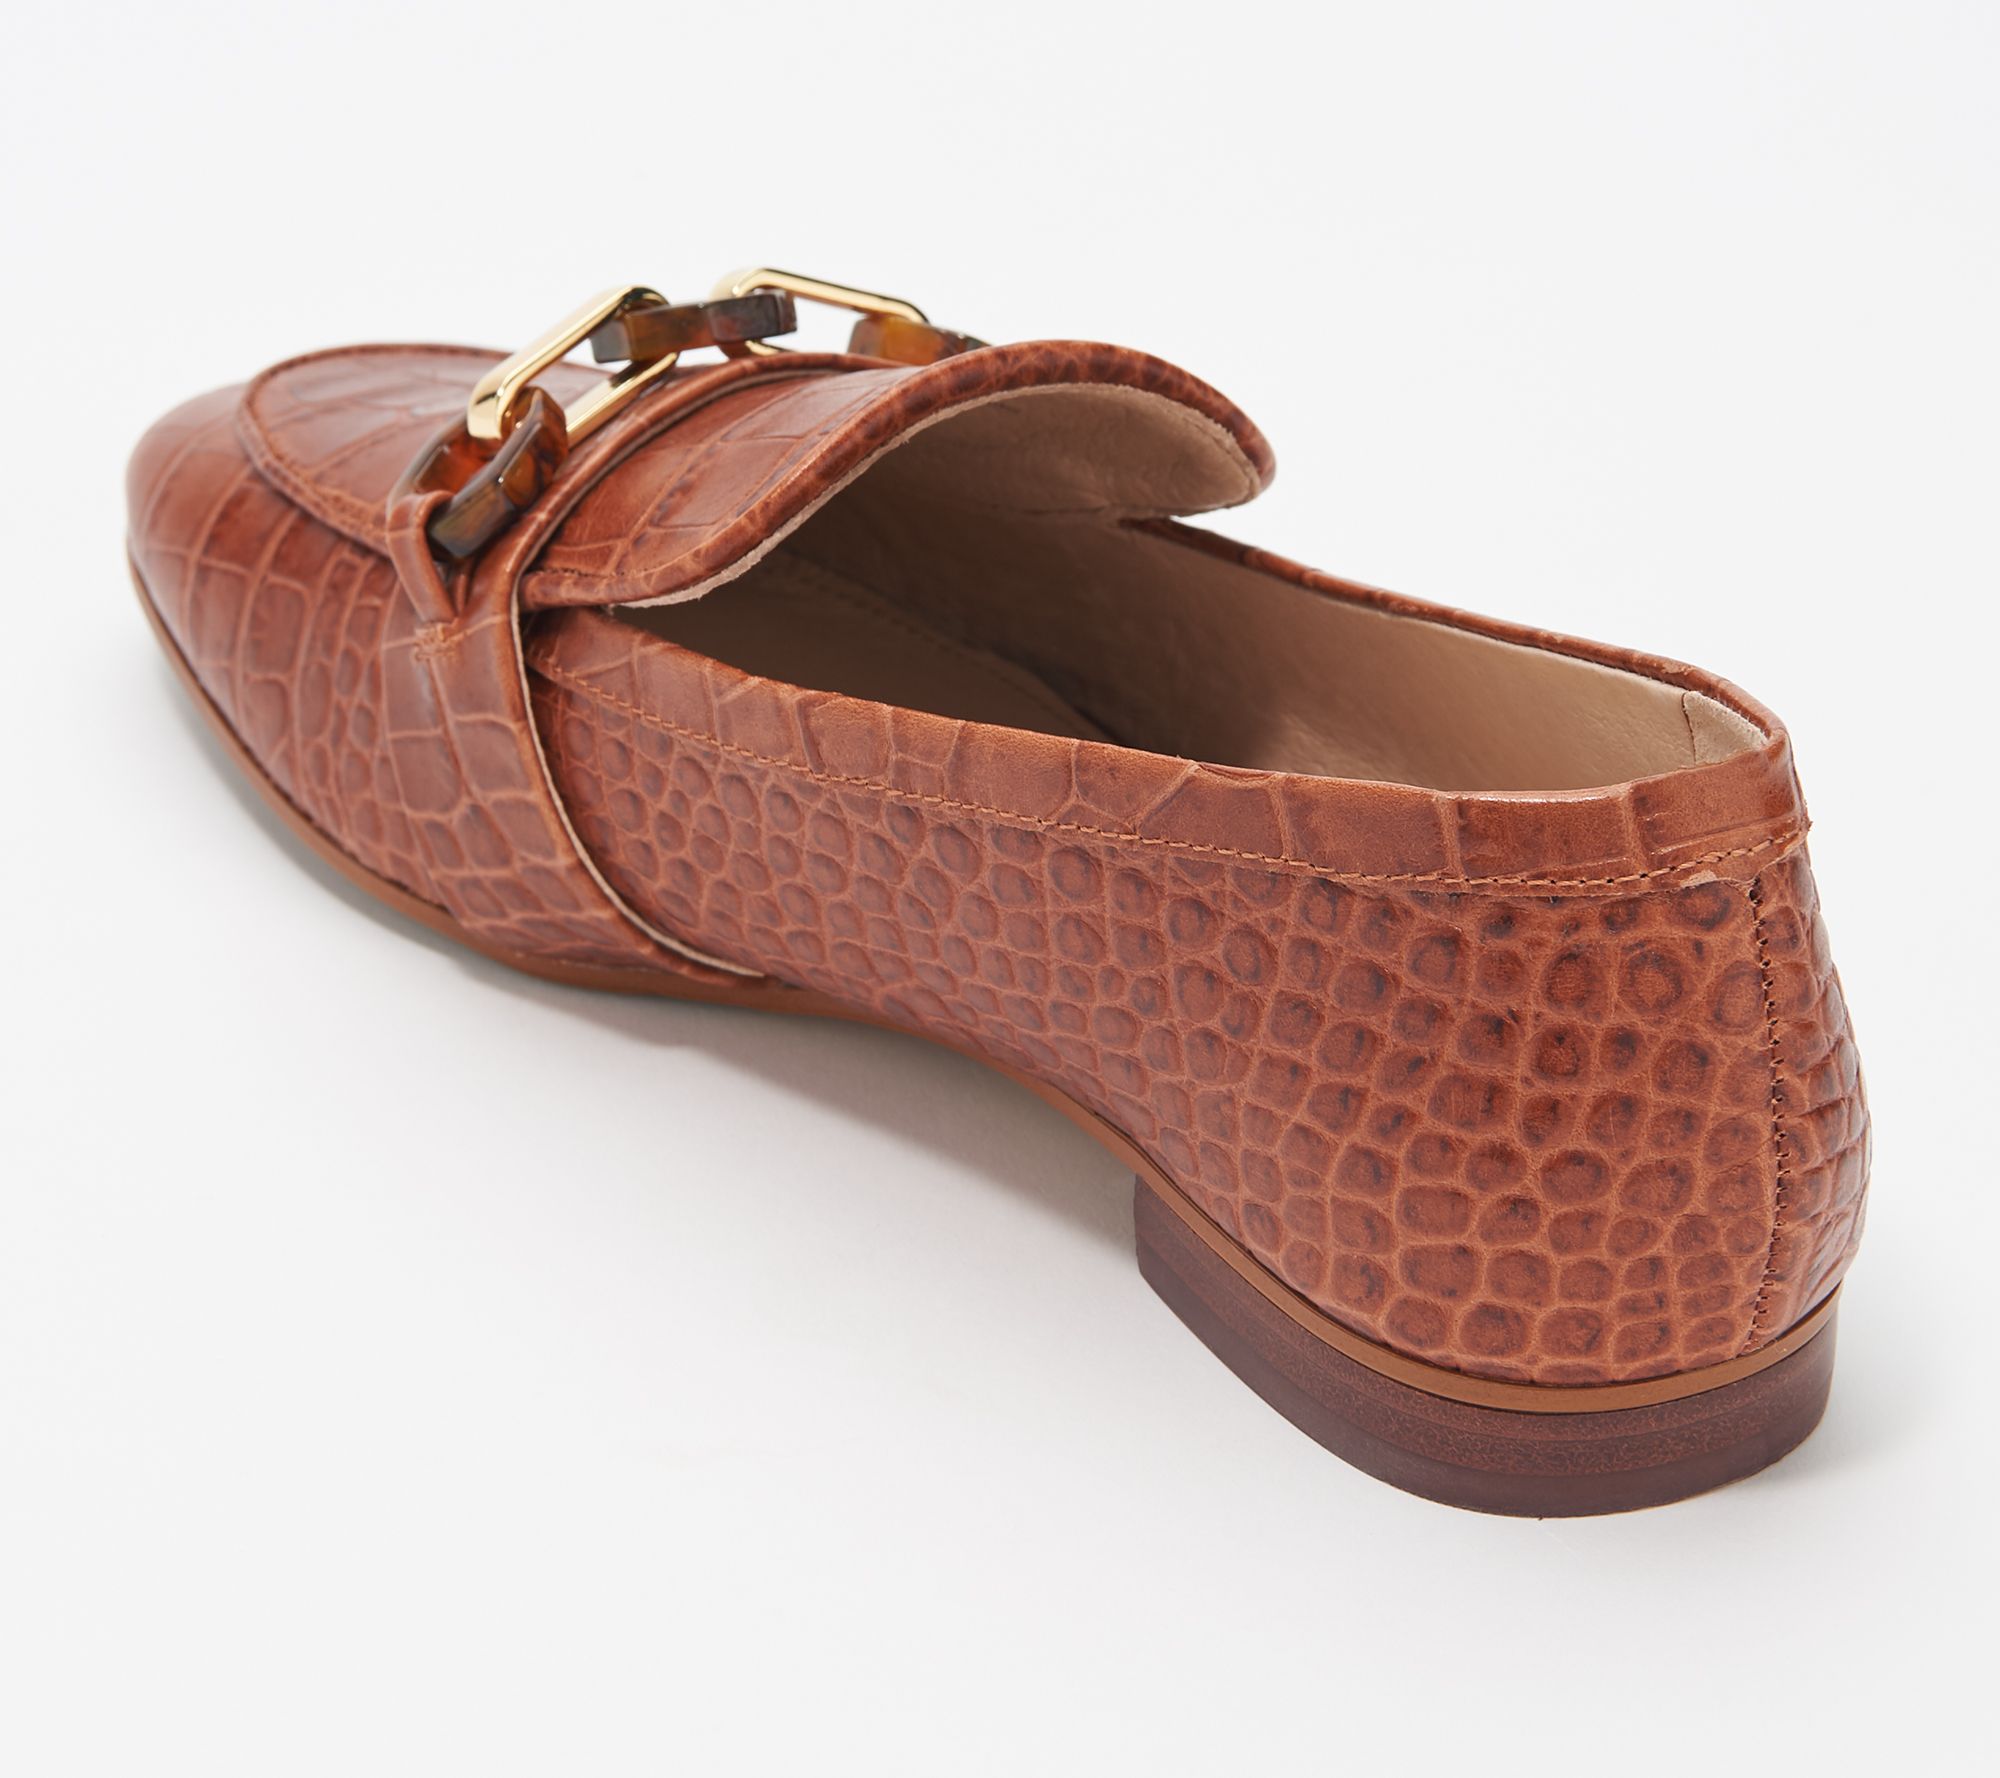 Louise et Cie Leather or Haircalf Loafers - Brone - QVC.com